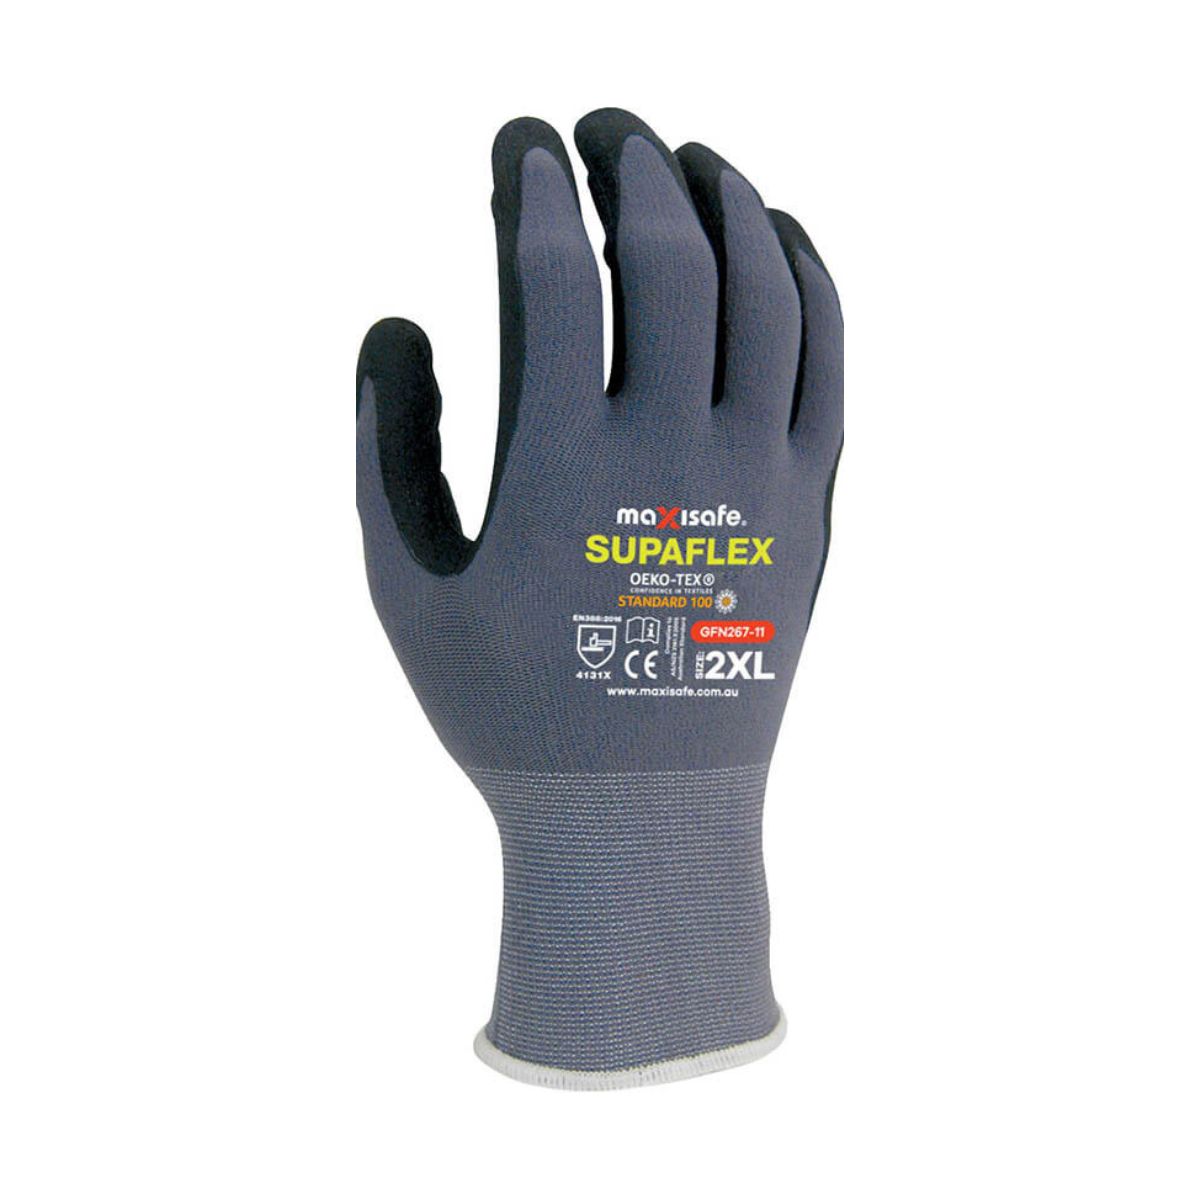 Maxisafe Supaflex Glove with Micro-foam Coating GFN267 (Pack of 12 pairs)